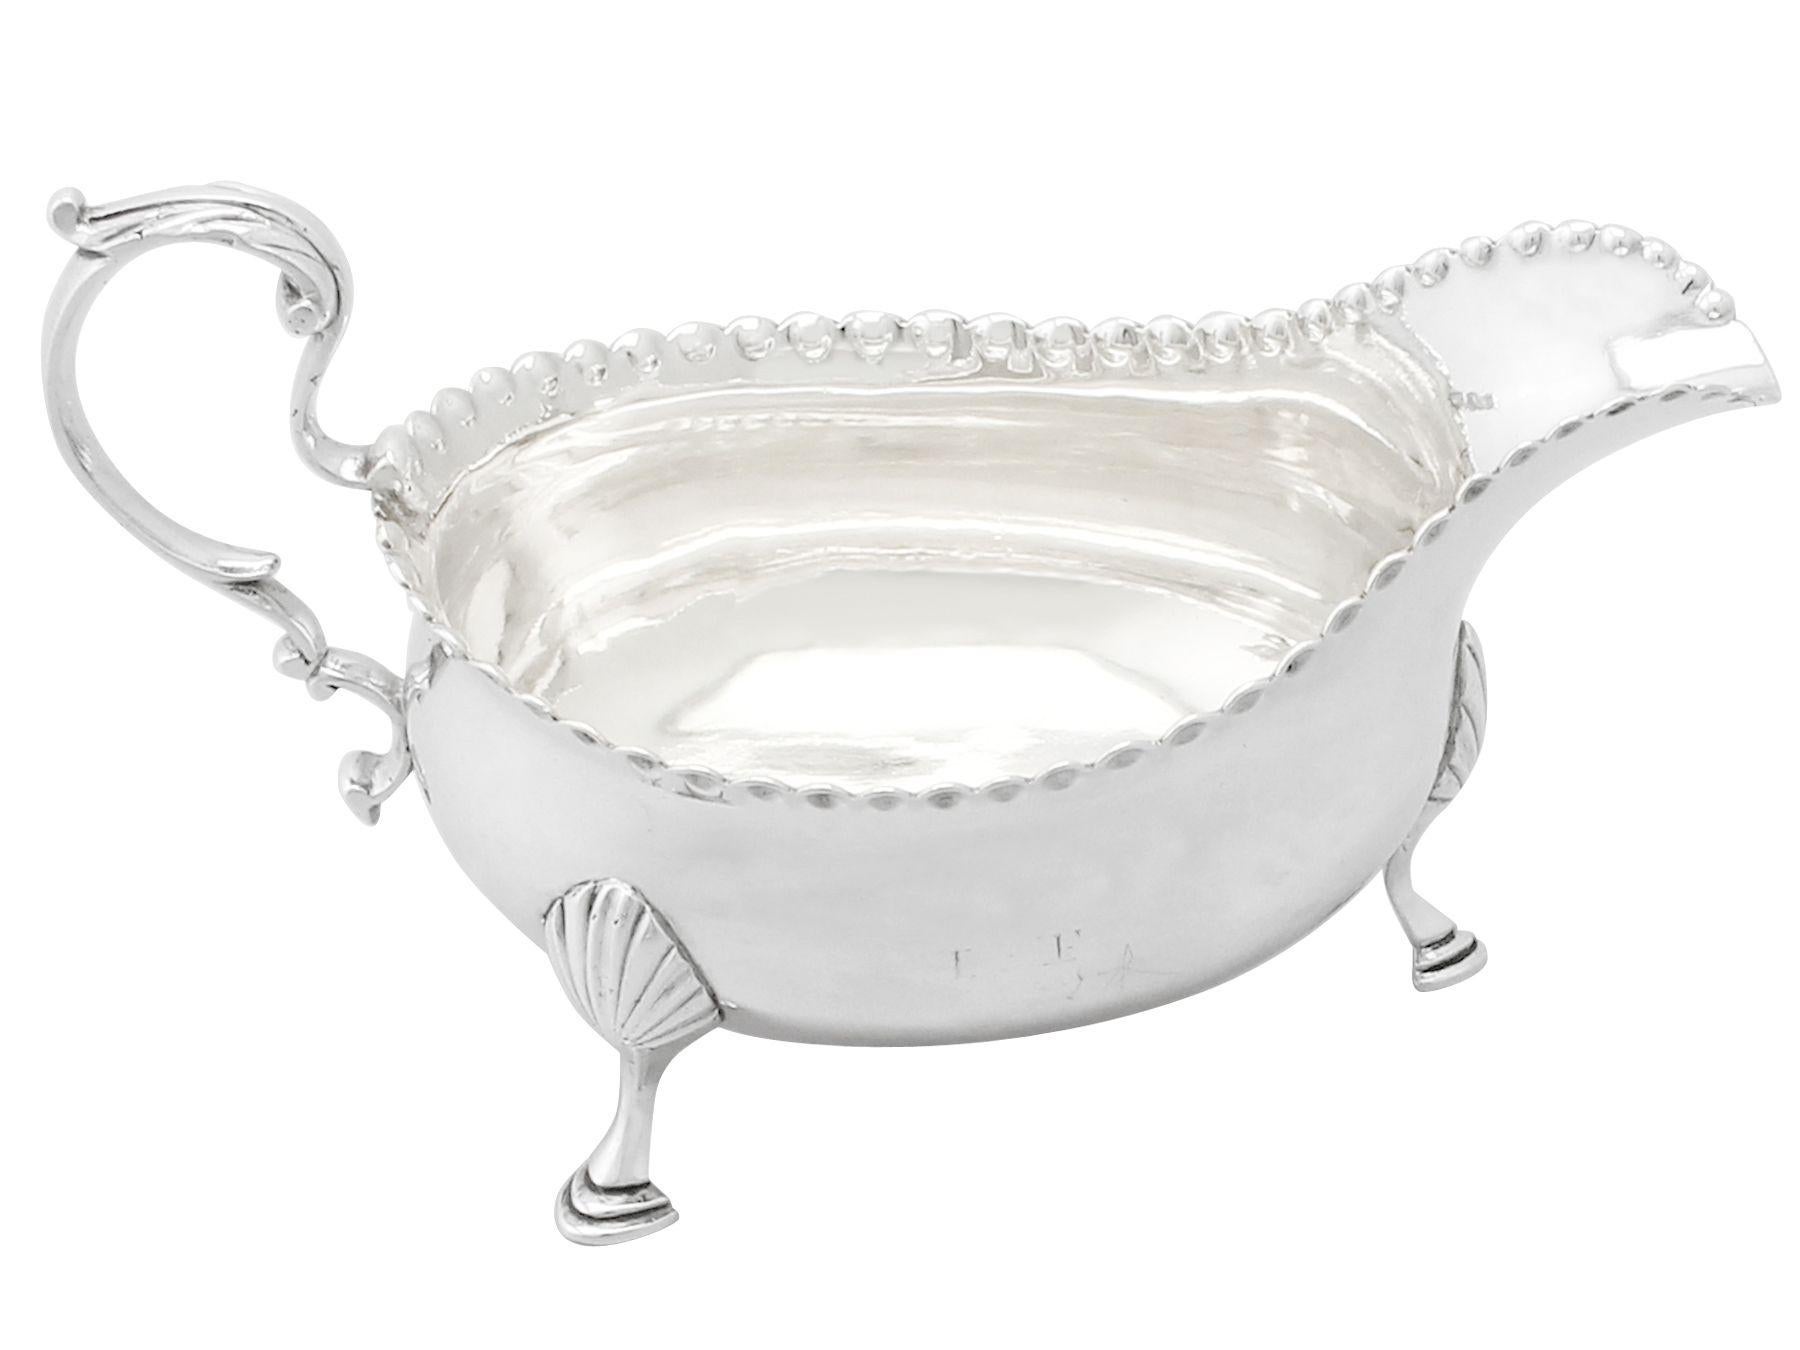 A fine and impressive antique Georgian Newcastle sterling silver sauce boat made by John Langlands I & John Robertson I; an addition to our silver dining collection.

This exceptional antique George III sterling silver gravy boat has a plain oval